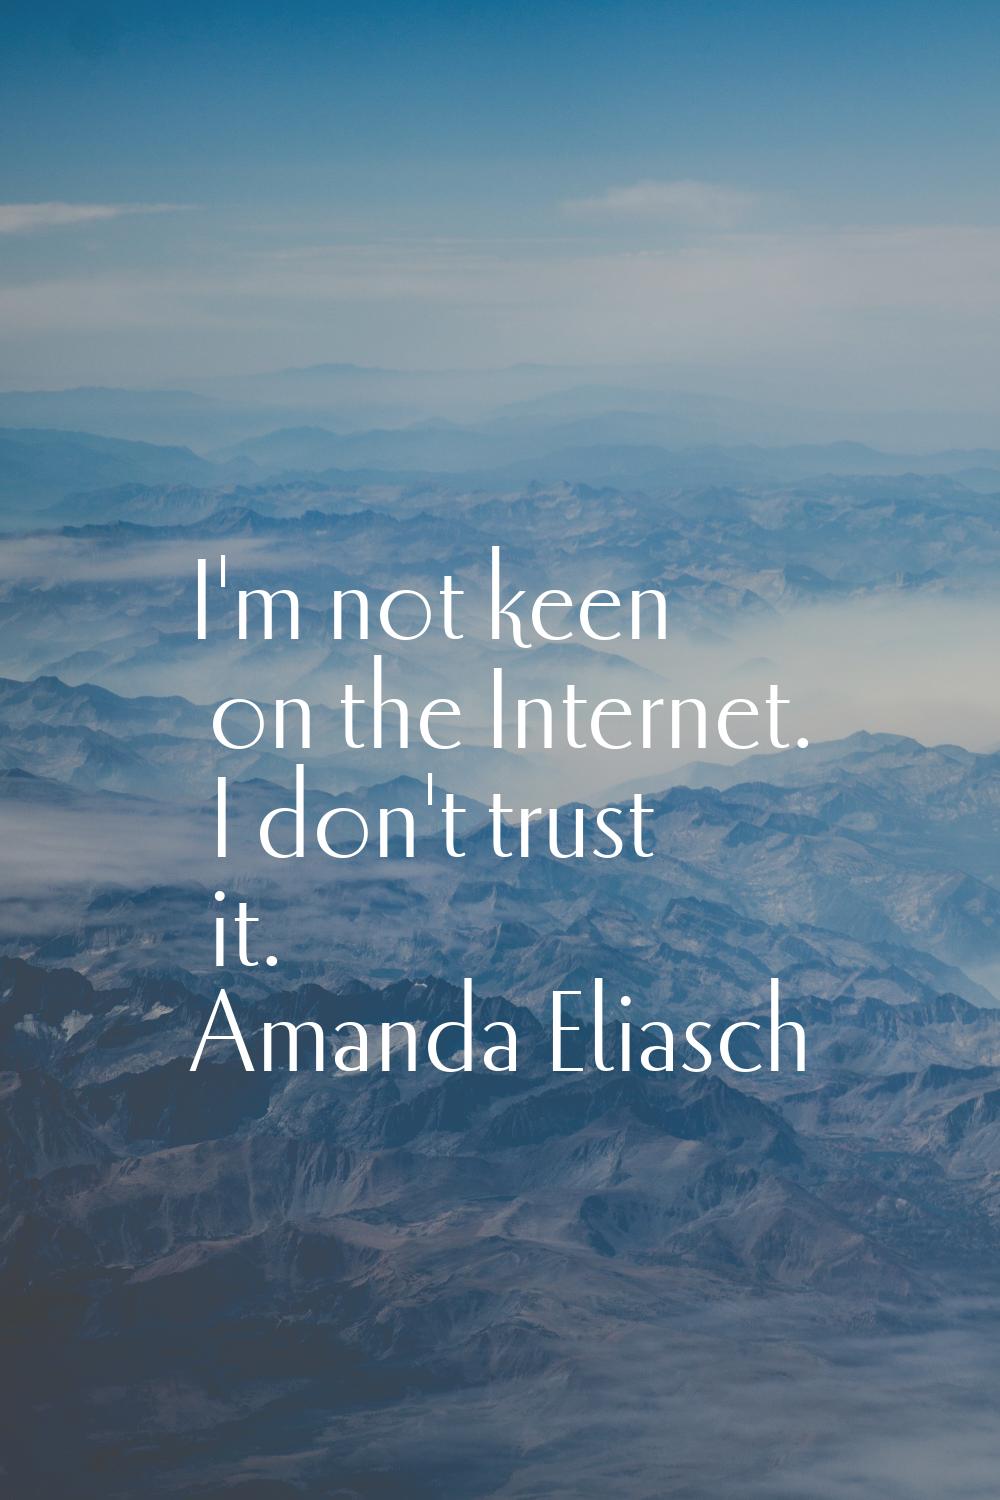 I'm not keen on the Internet. I don't trust it.